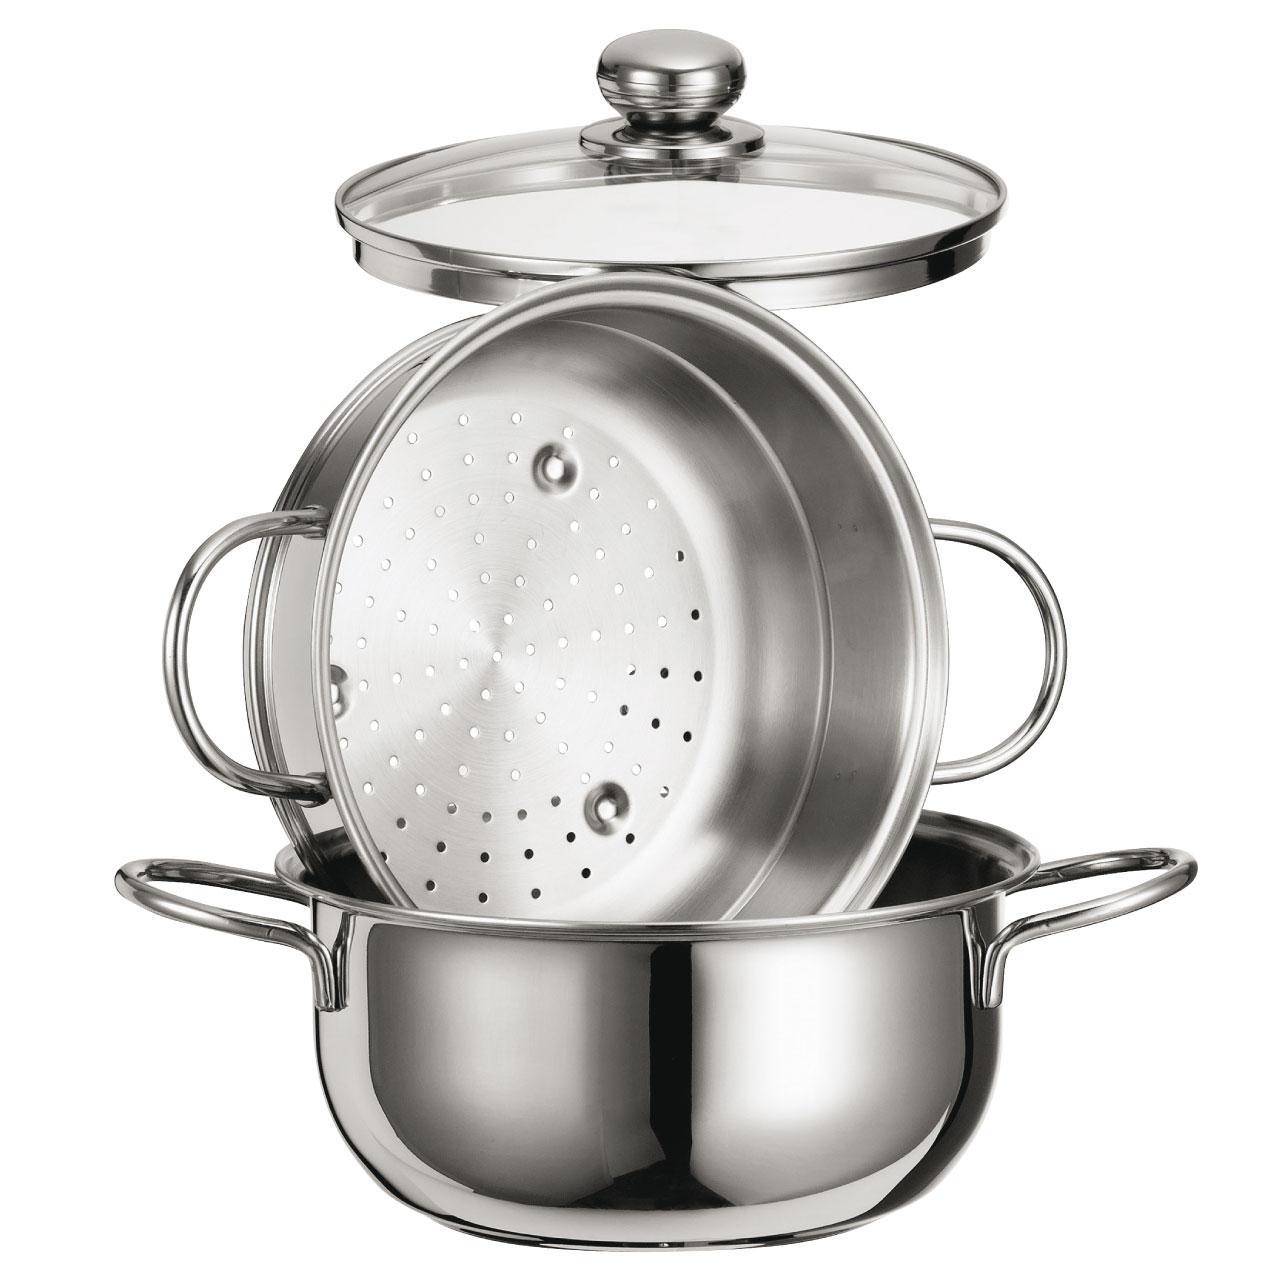 Special Cooking Set Steamer 8 Inc With Glass Lid